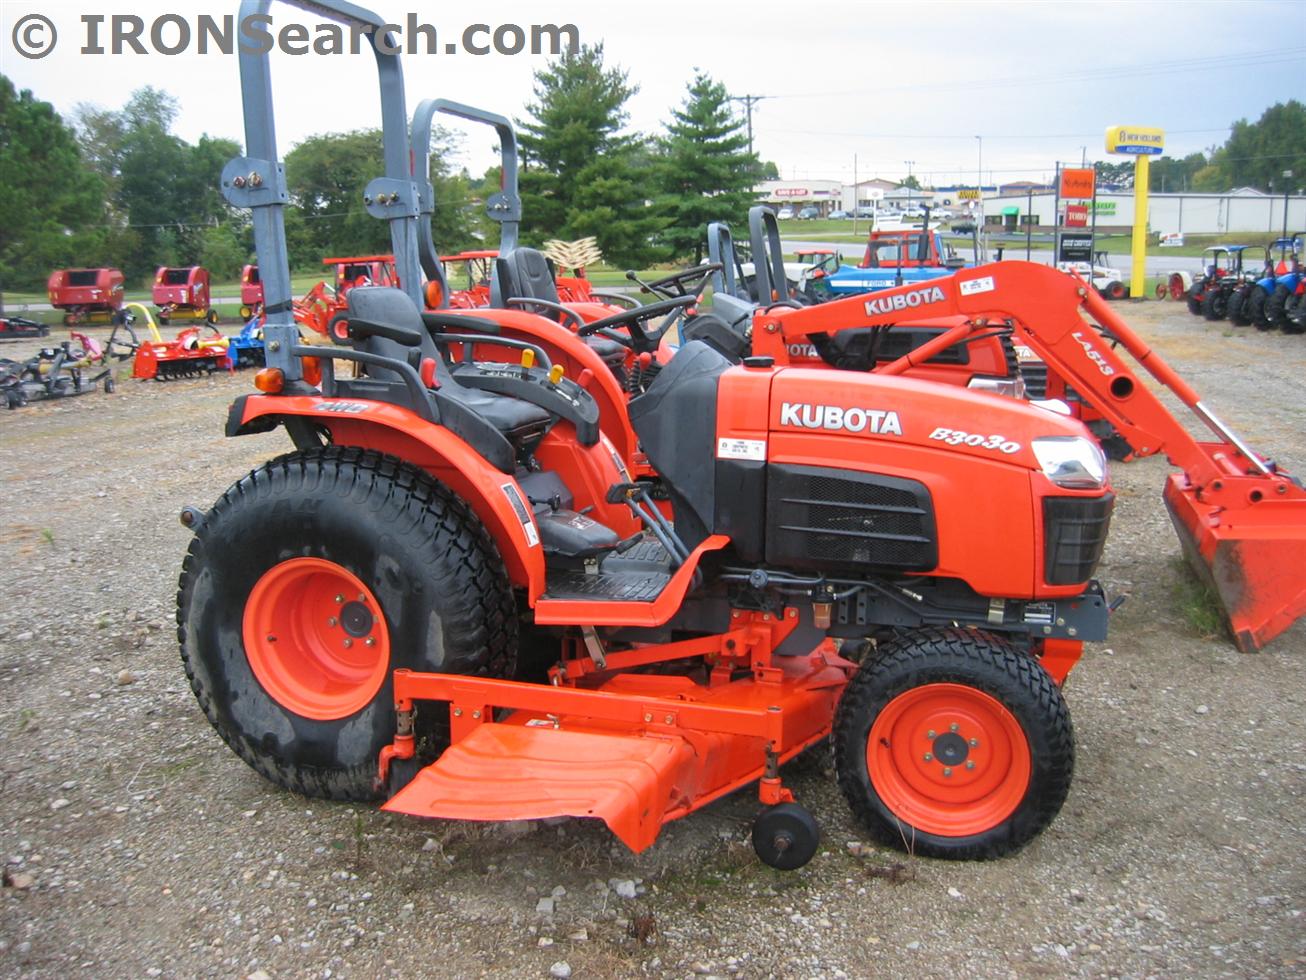 IRON Search - 2007 Kubota B3030 Tractor For Sale By Farm Equipment ...